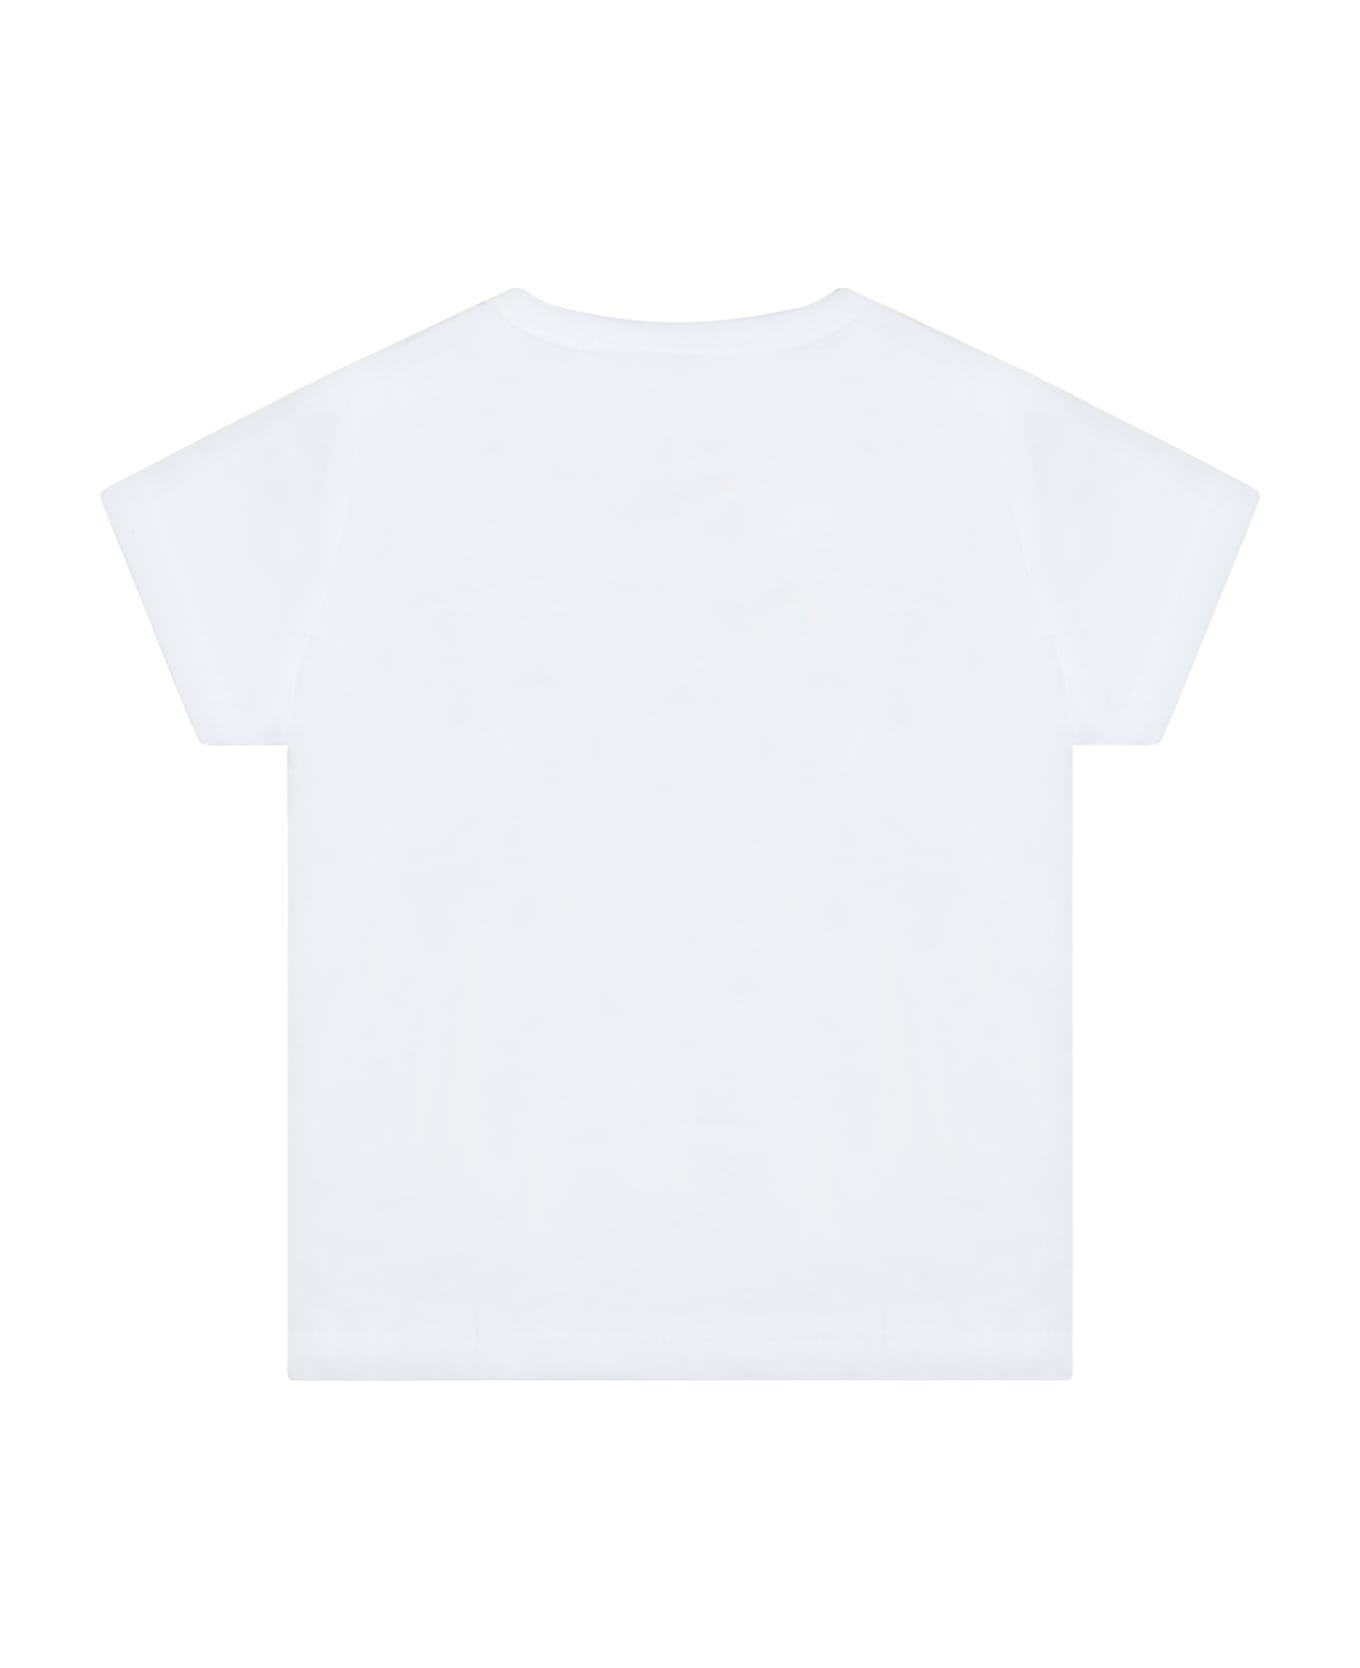 Kenzo Kids White T-shirt For Baby Girl With Iconic Roaring Tiger And Logo - Bianco